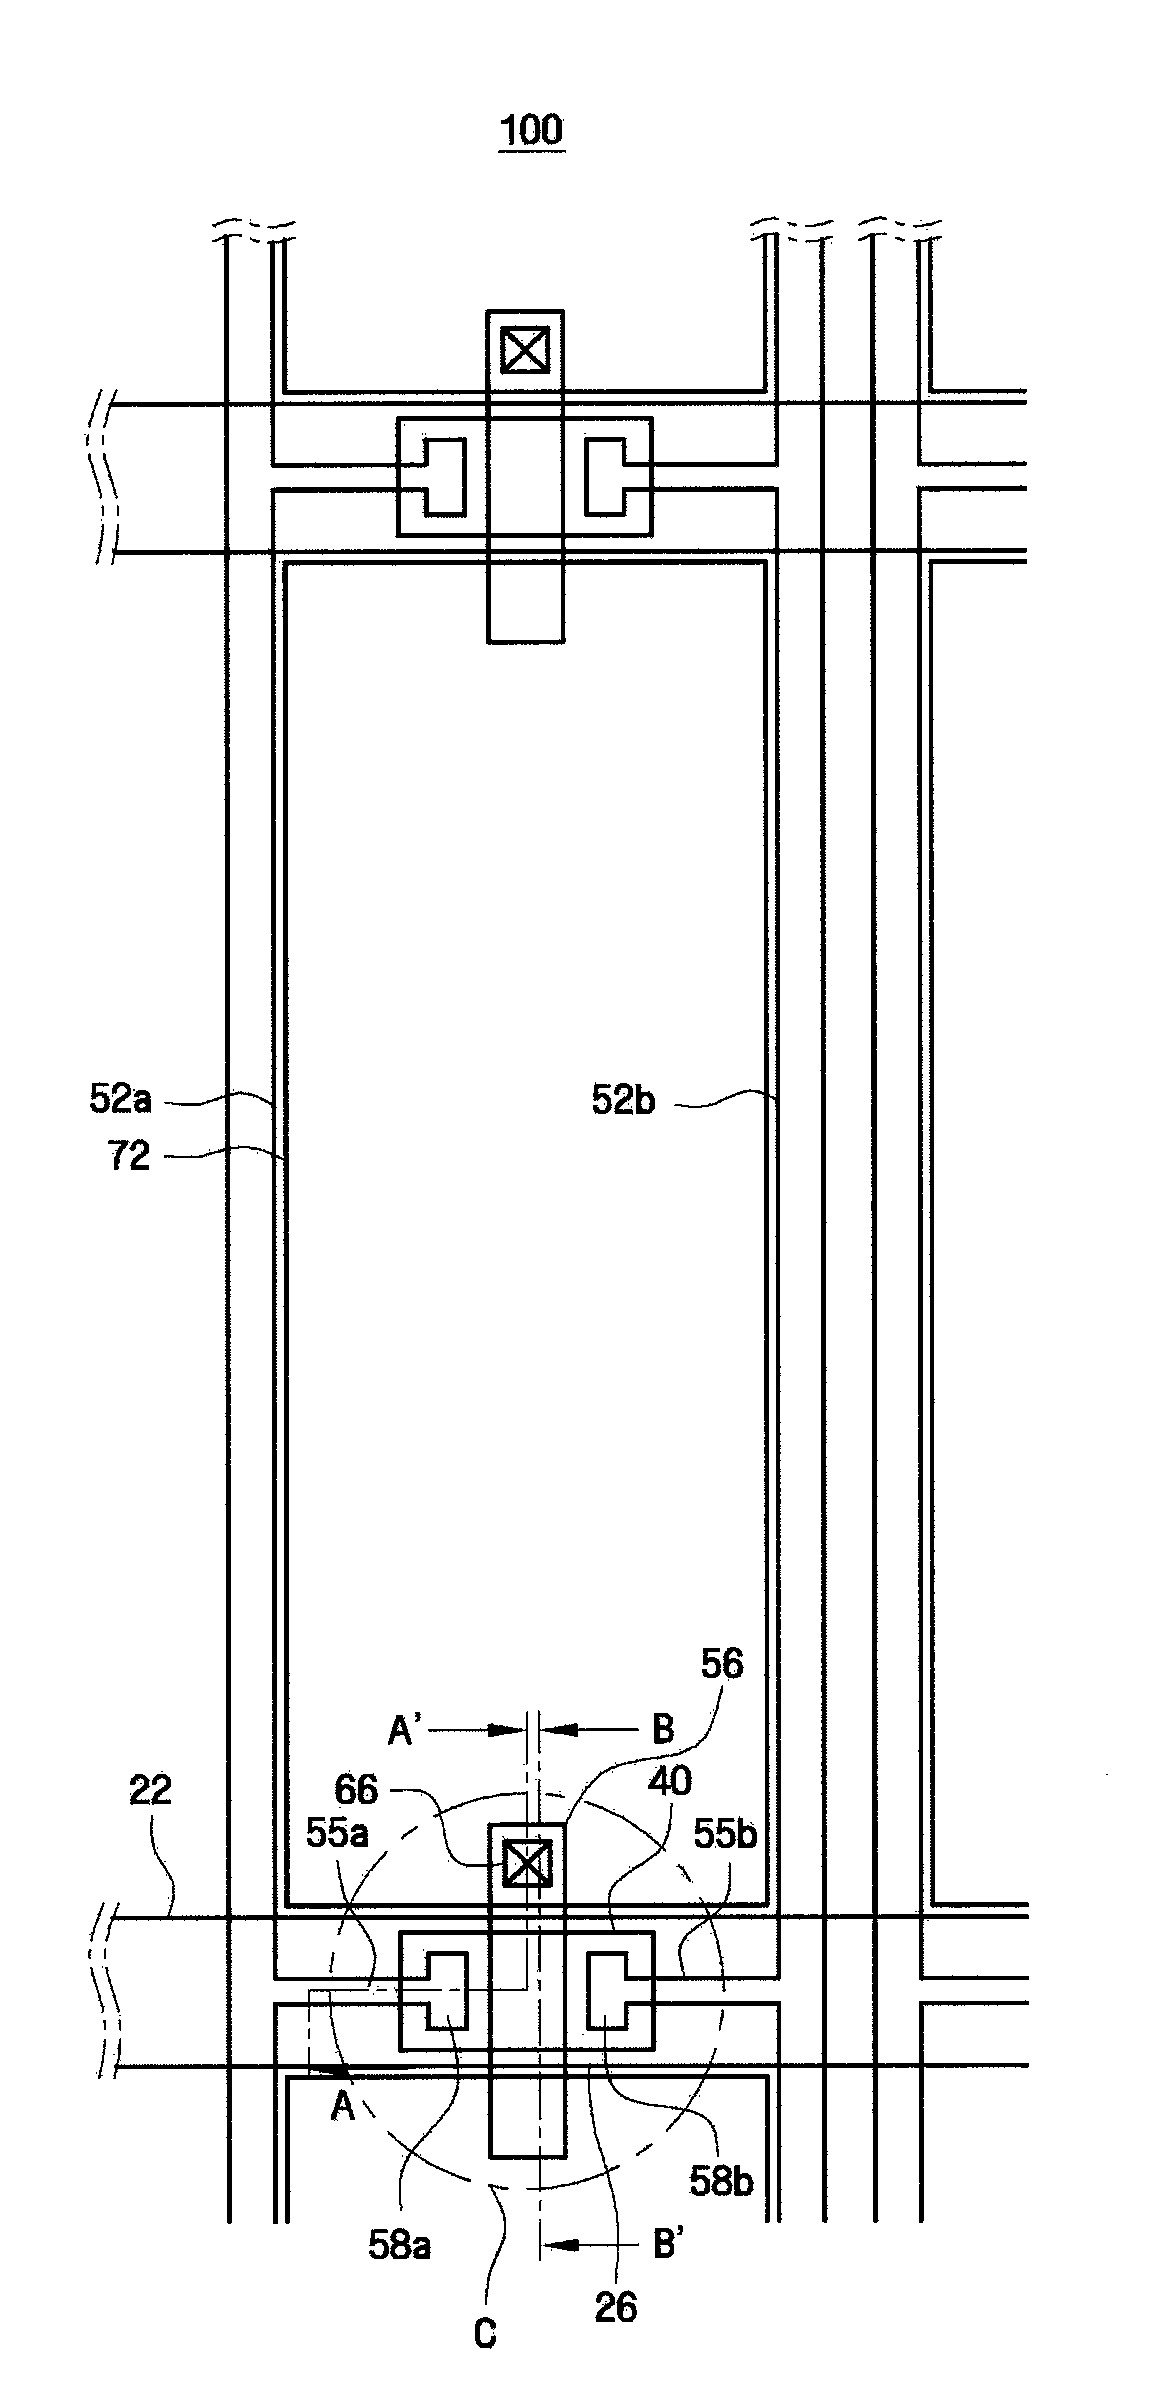 Thin film transistor substrate having structure for compensating for mask misalignment